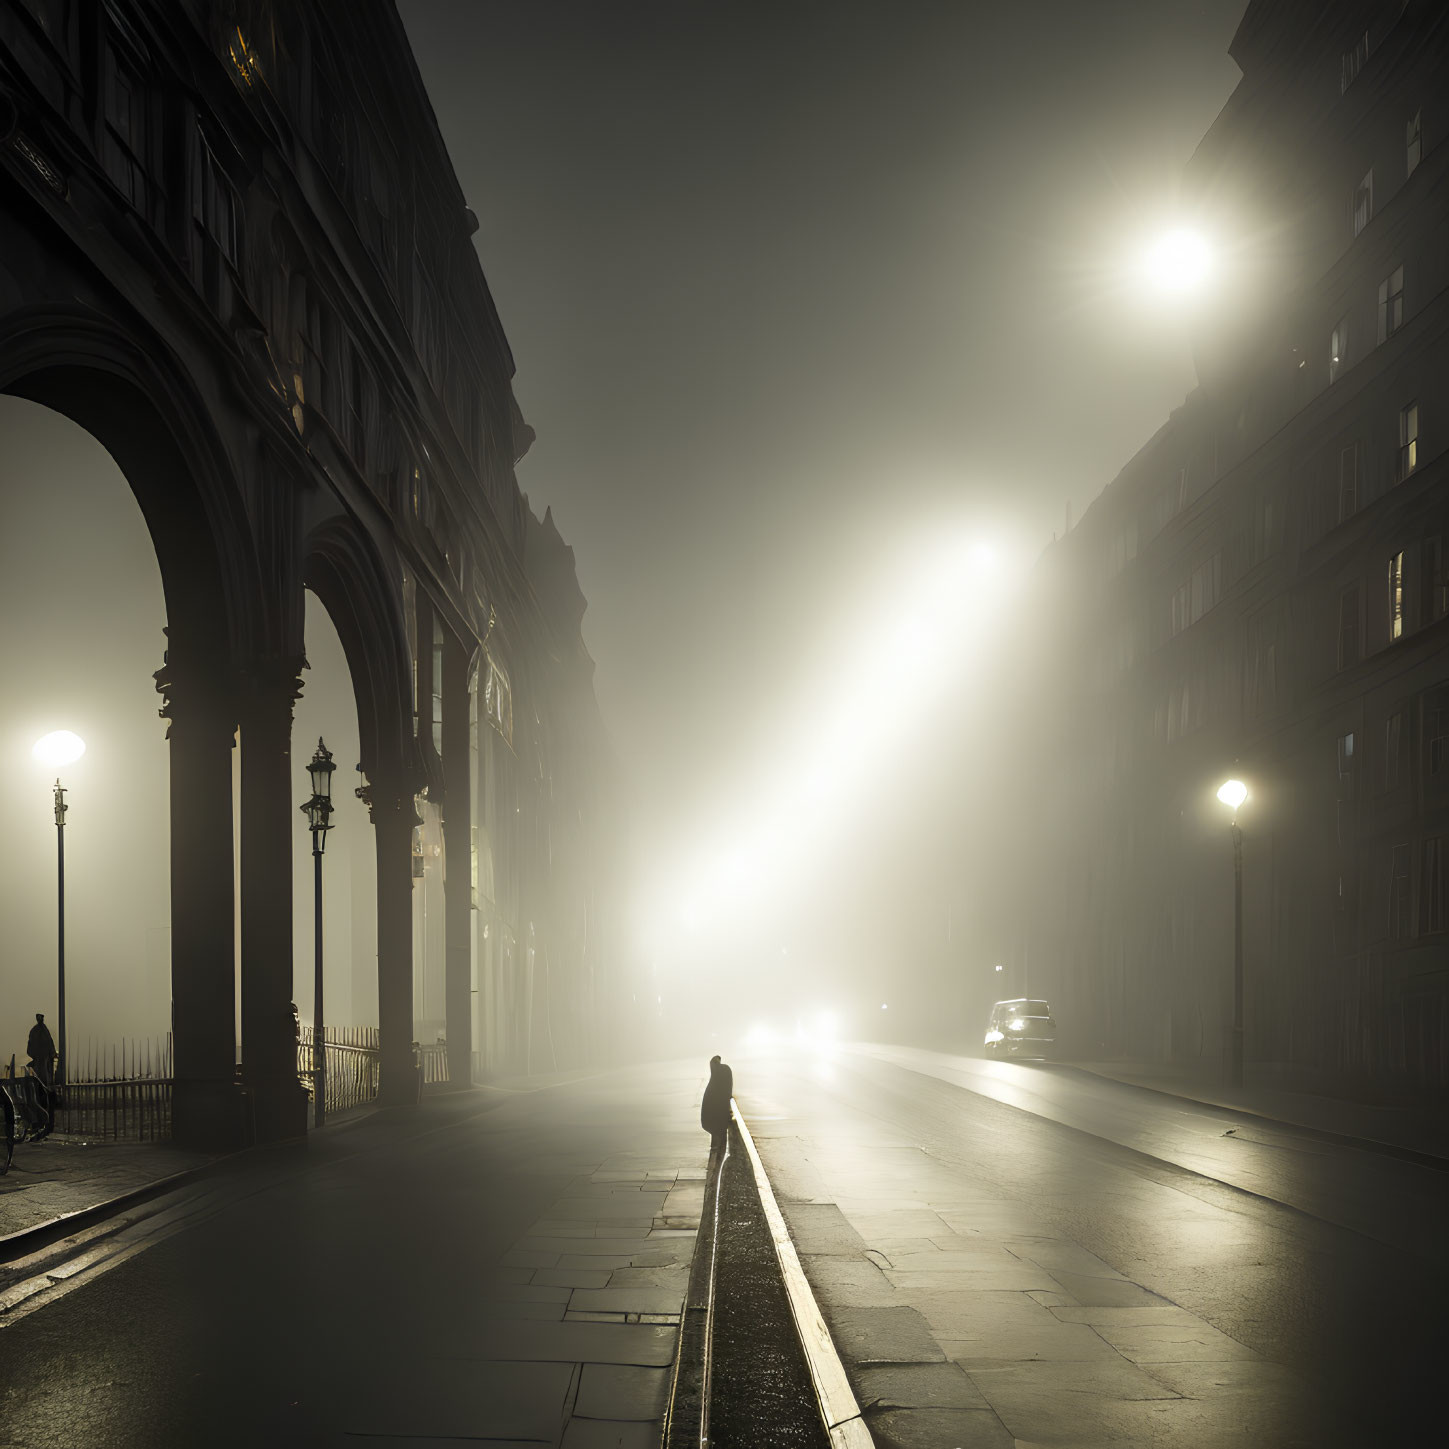 Solitary figure walking on misty city street at night